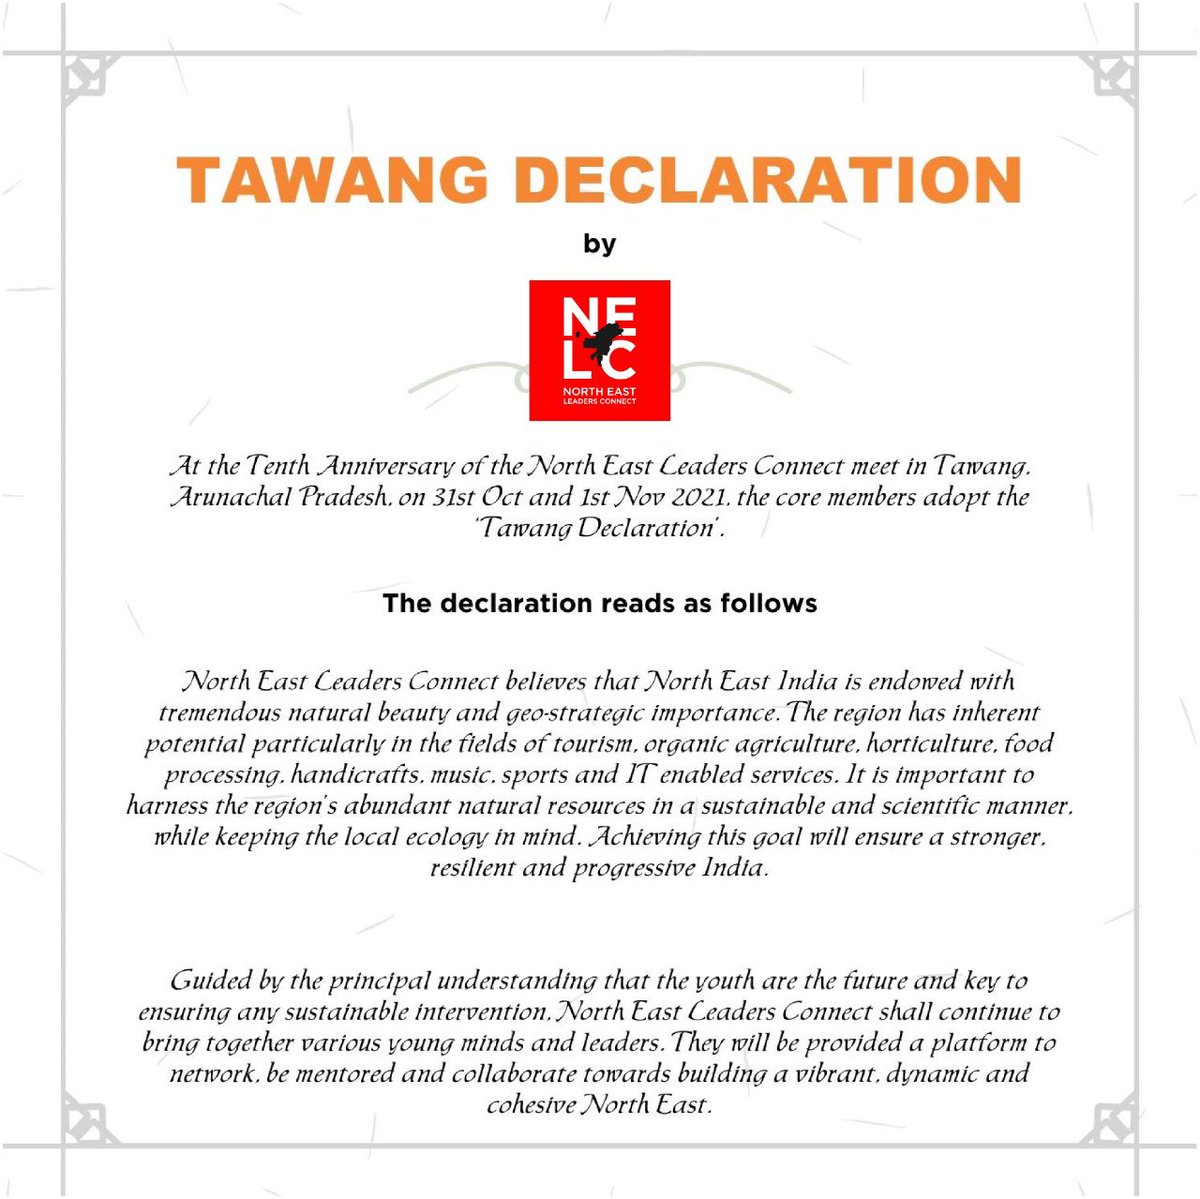 Immensely proud to be part of the #TawangDeclaration, an outcome of 10th anniversary meeting of @NortheastLC. 

The declaration aims to harness the vast potential of #NorthEast in sustainable manner and to tap creative potential of the youths for progressive and resurgent India.